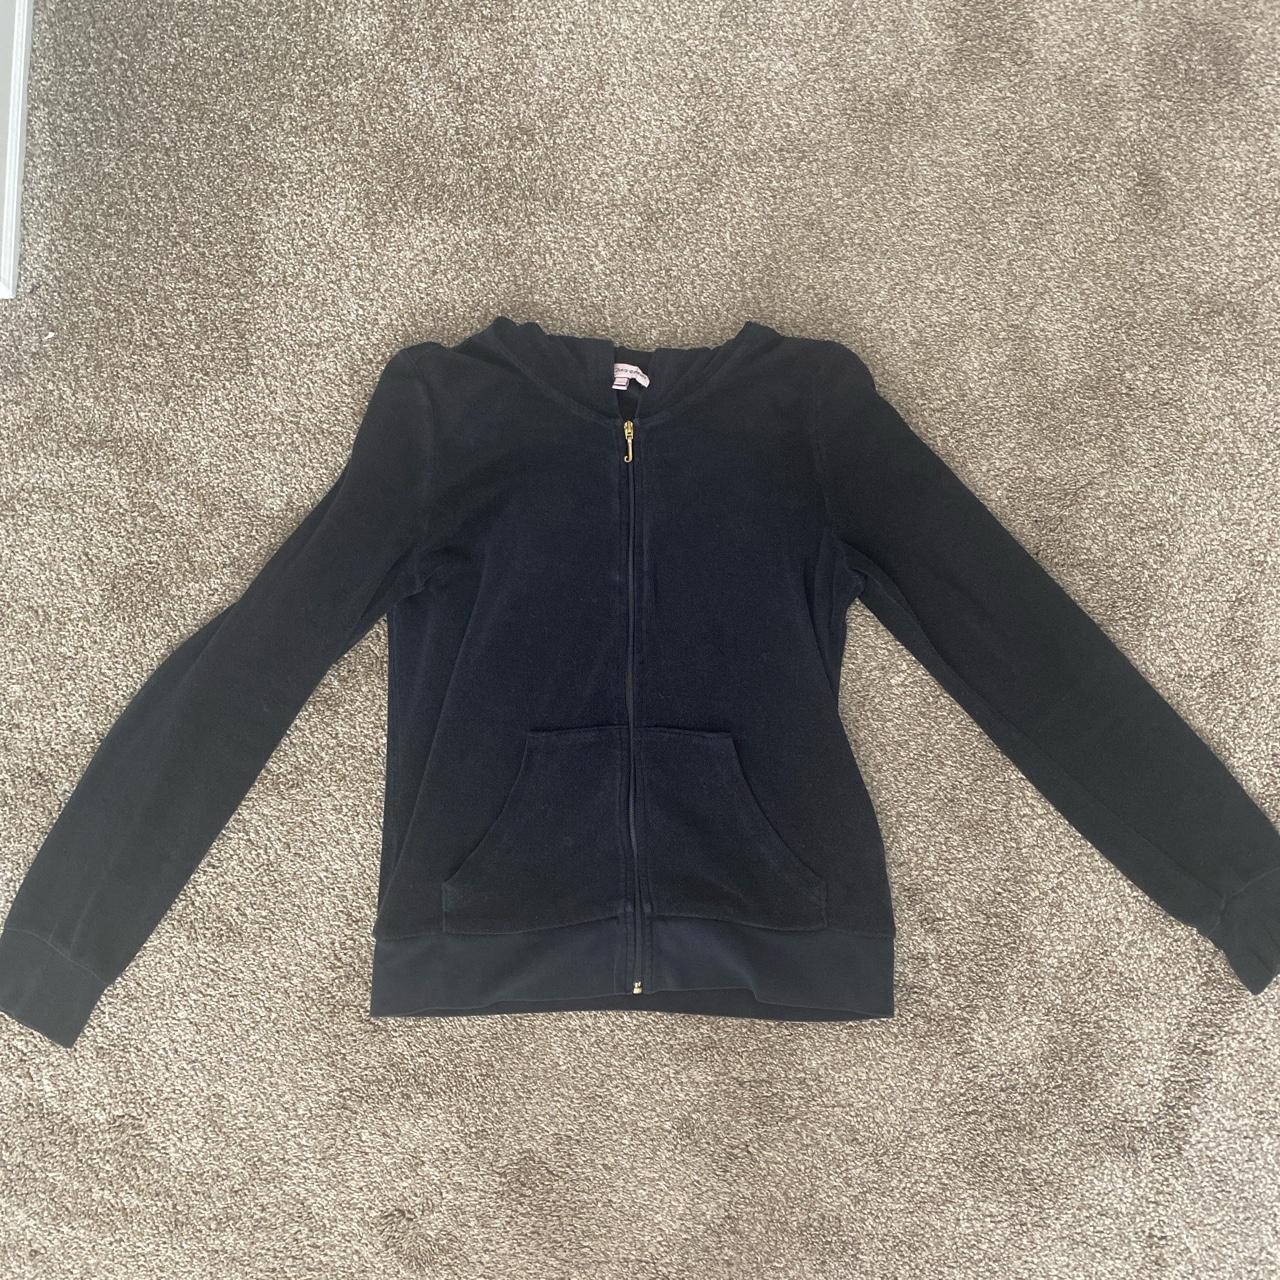 Black Juicy Couture Jacket Good condition Some... - Depop